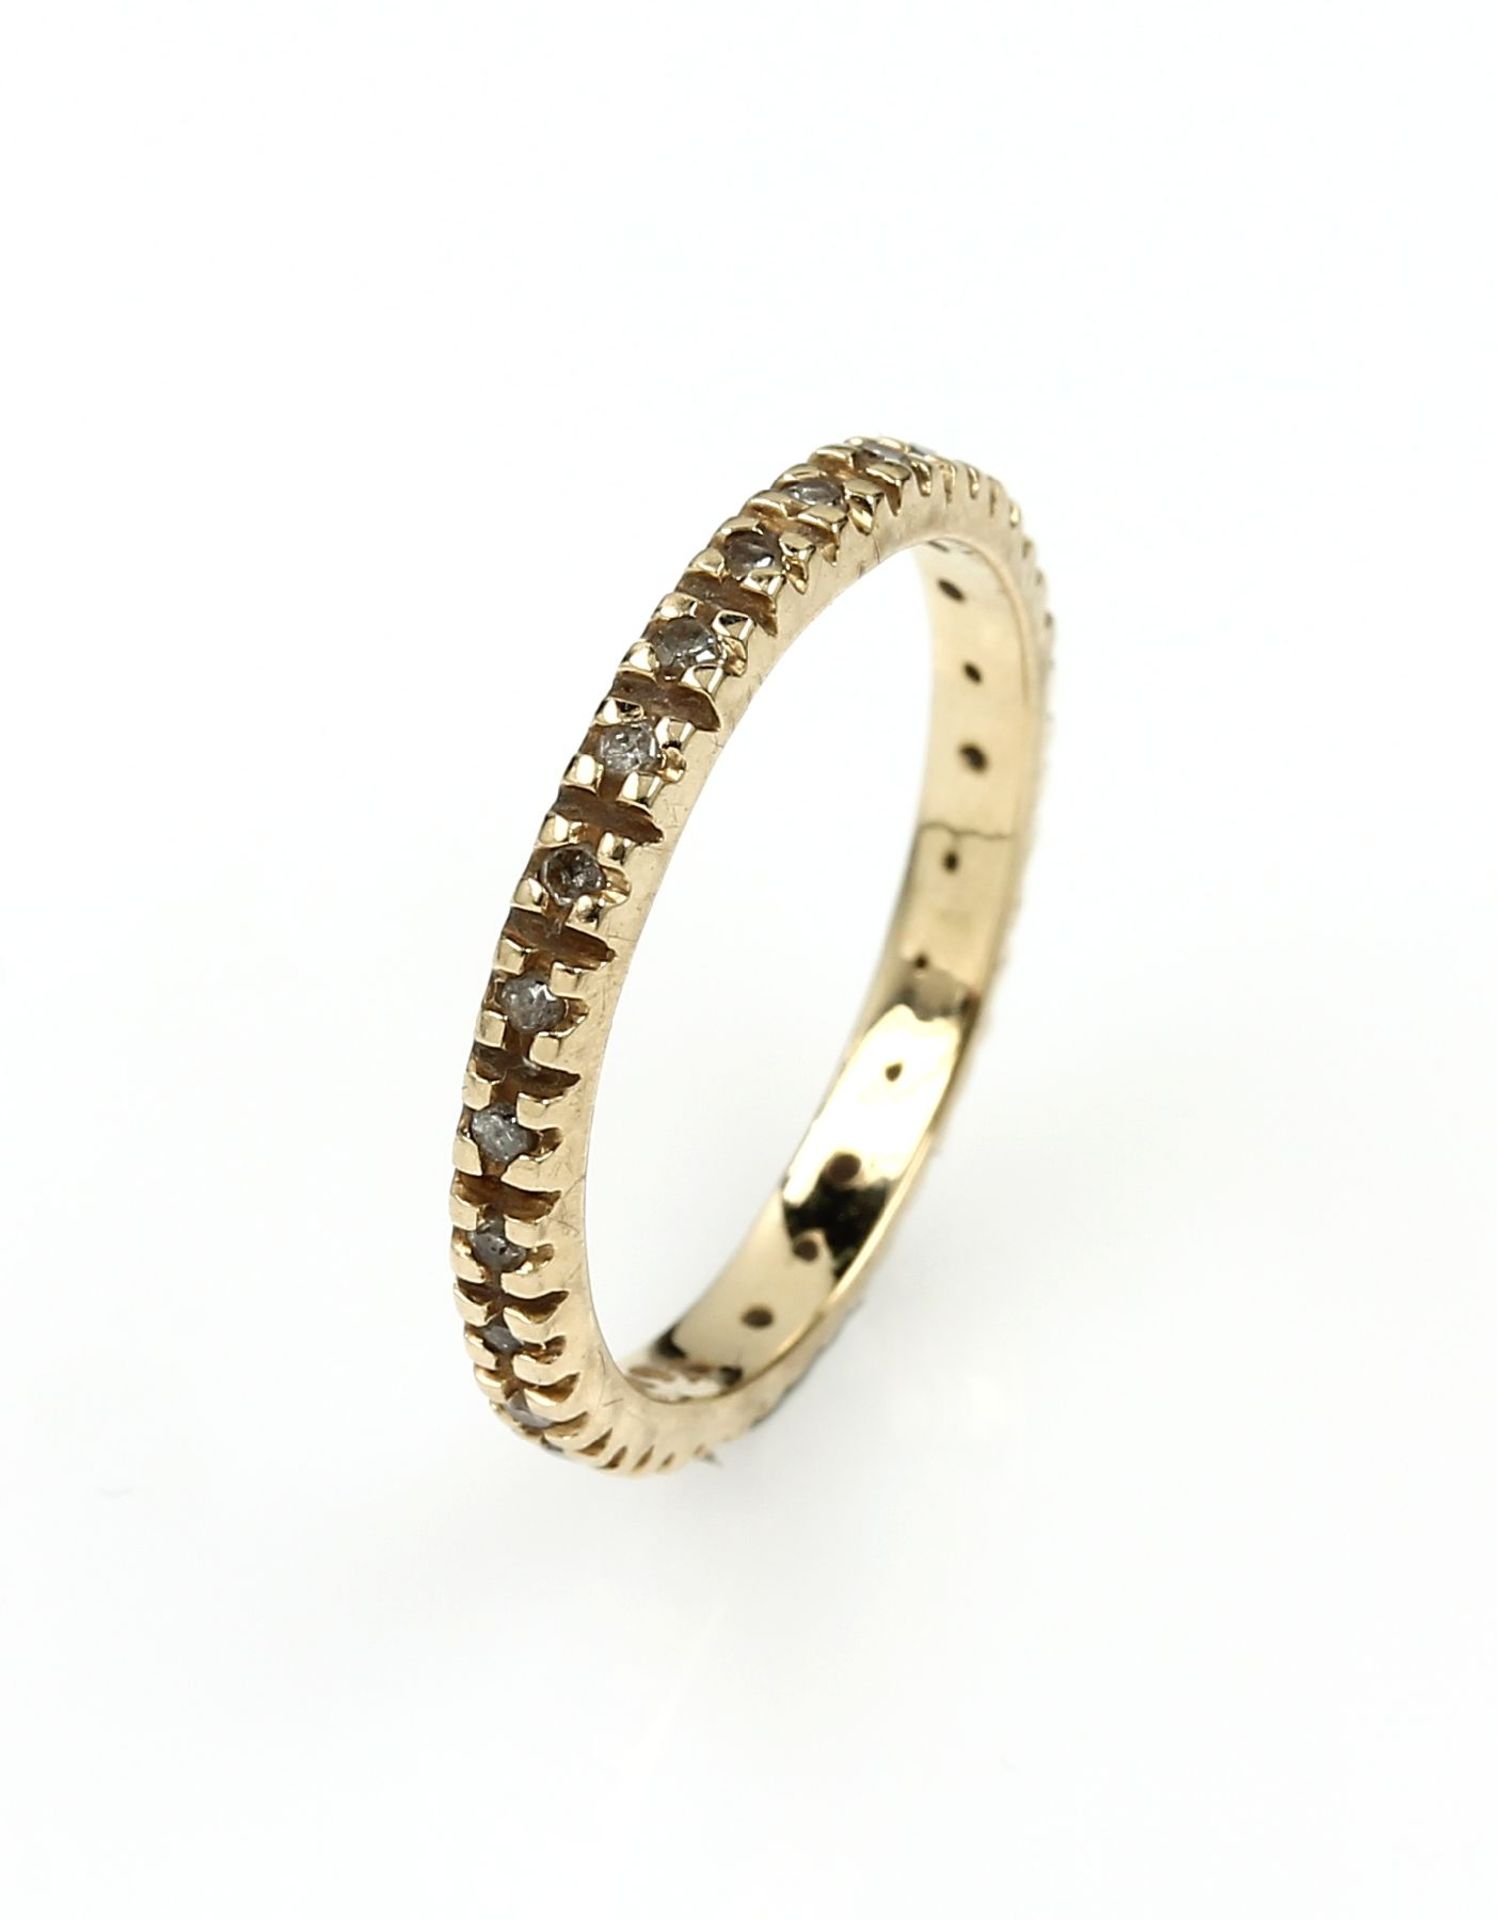 14 kt gold memoryring with diamonds , YG 585/000, diamonds total approx. 0.25 ct Wesselton/si-p1,